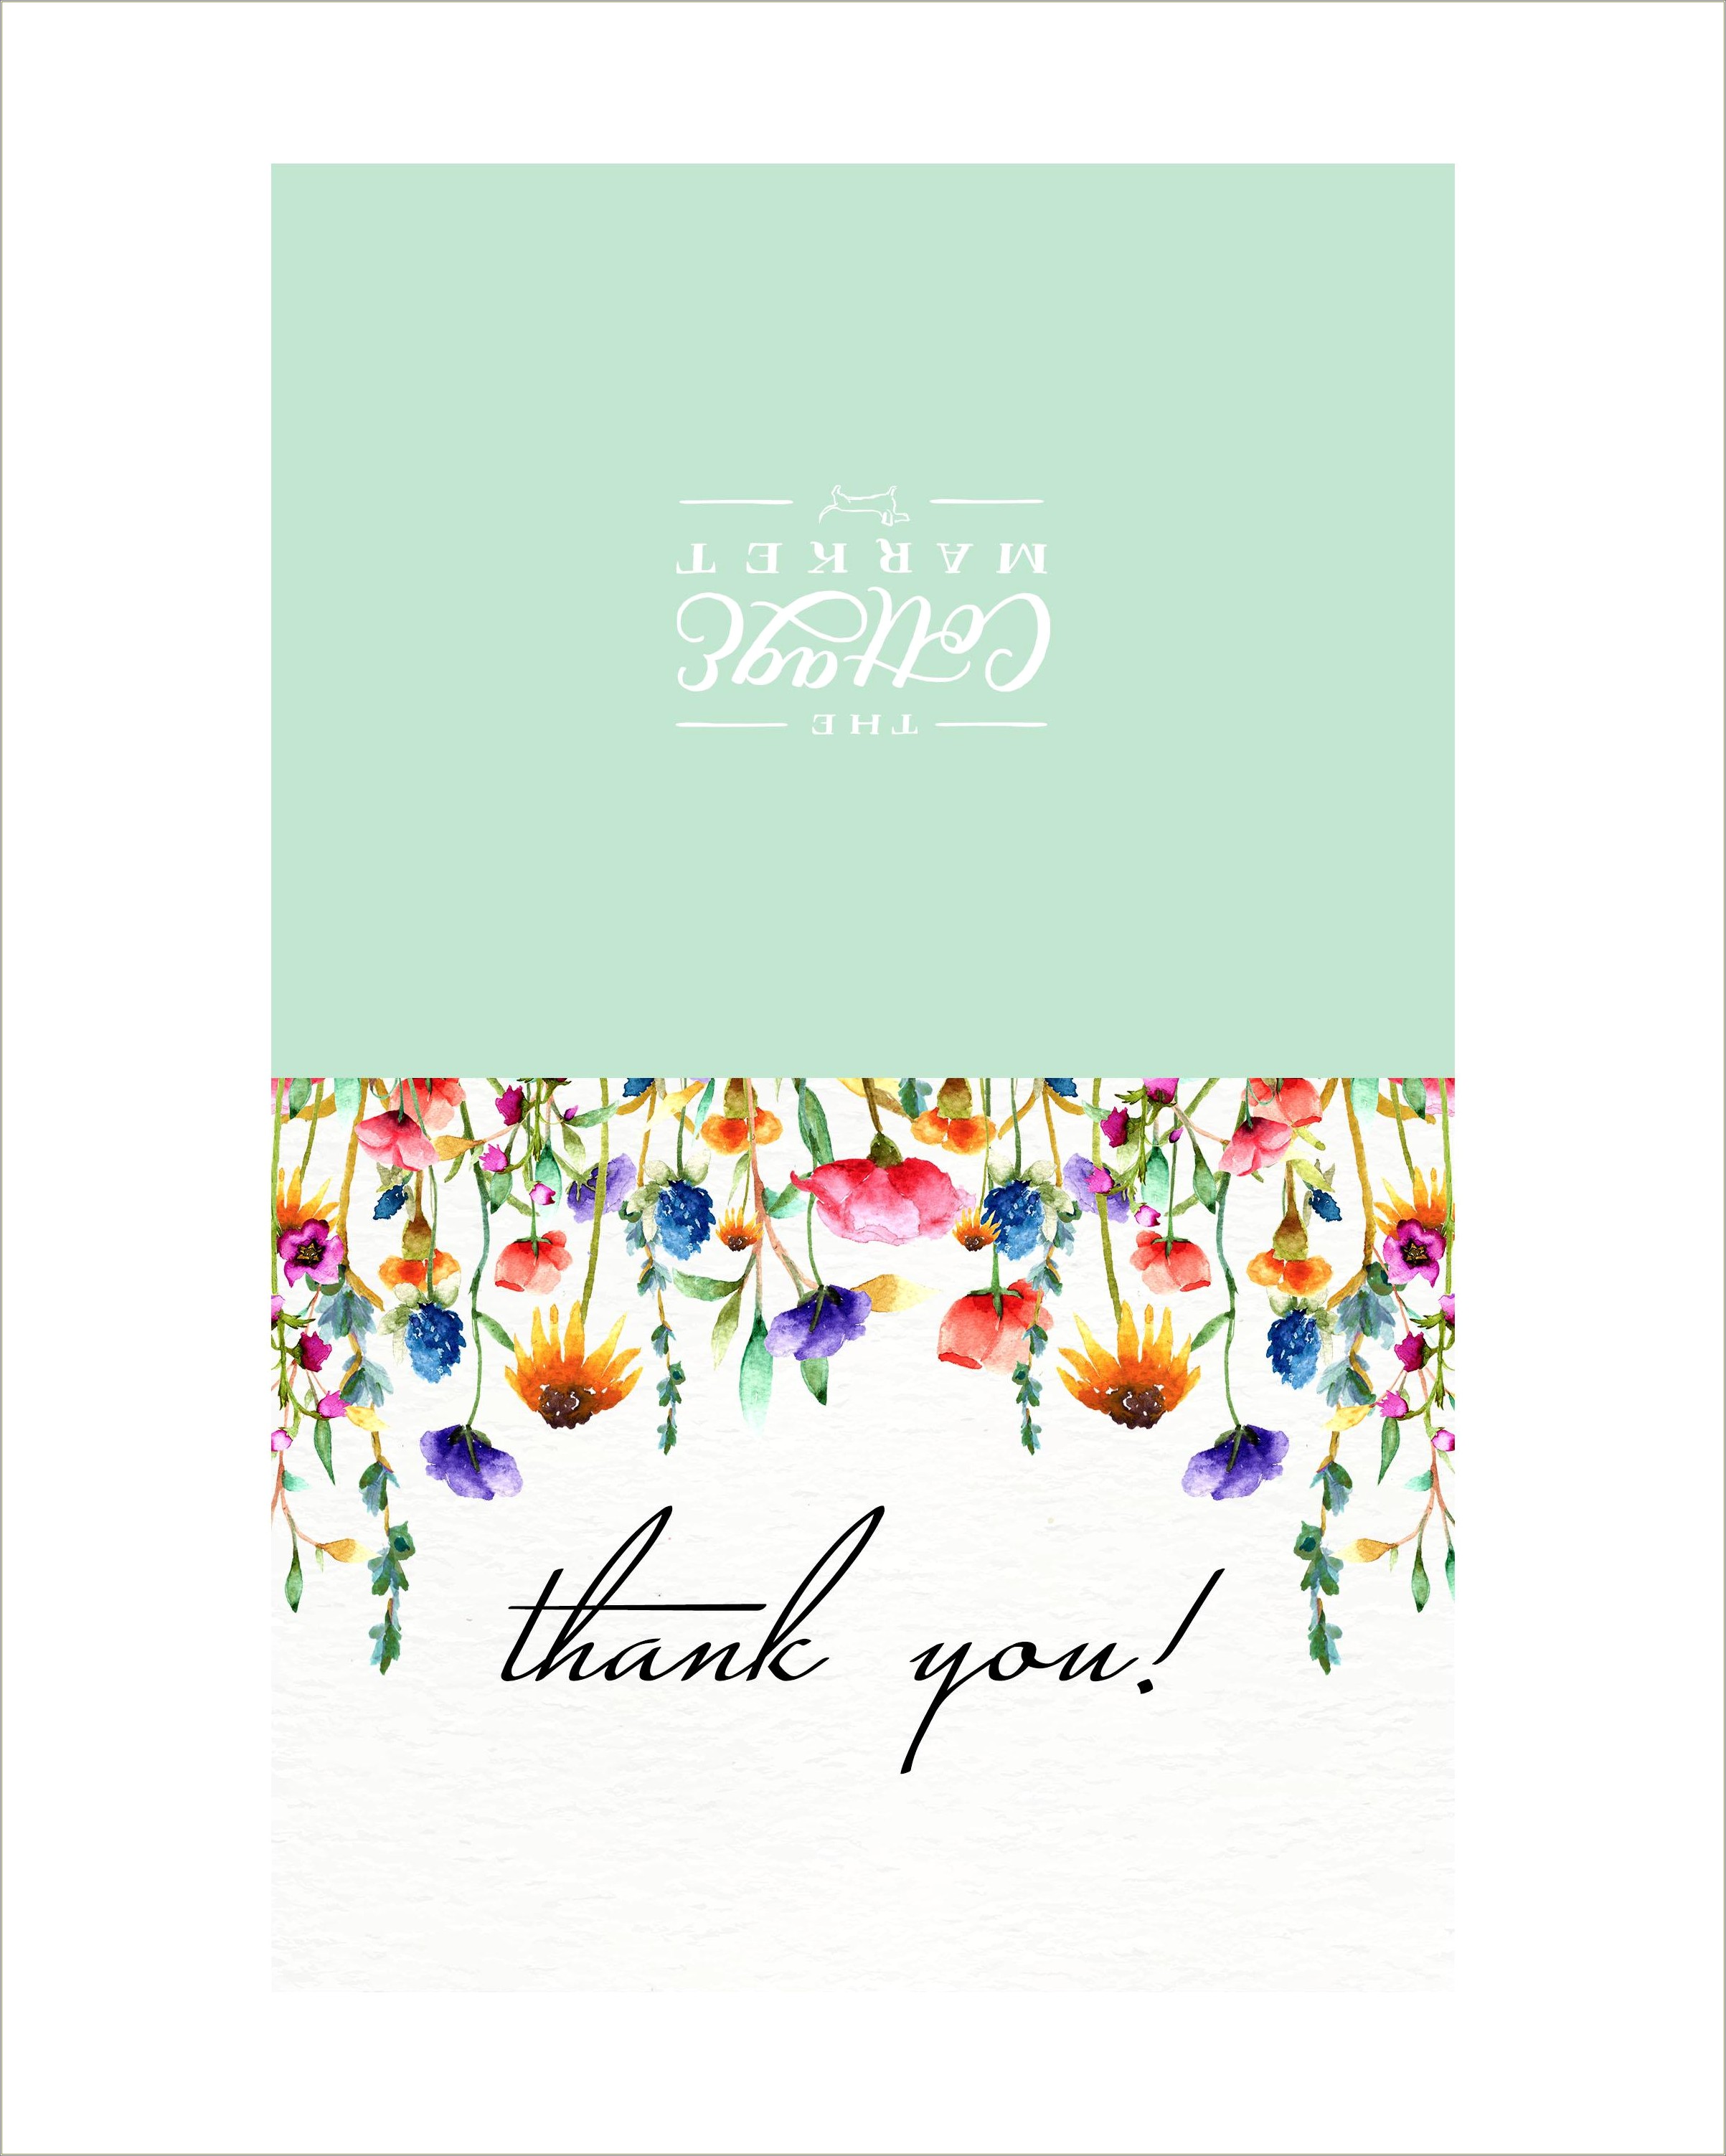 Free Online Templates For Thank You Cards